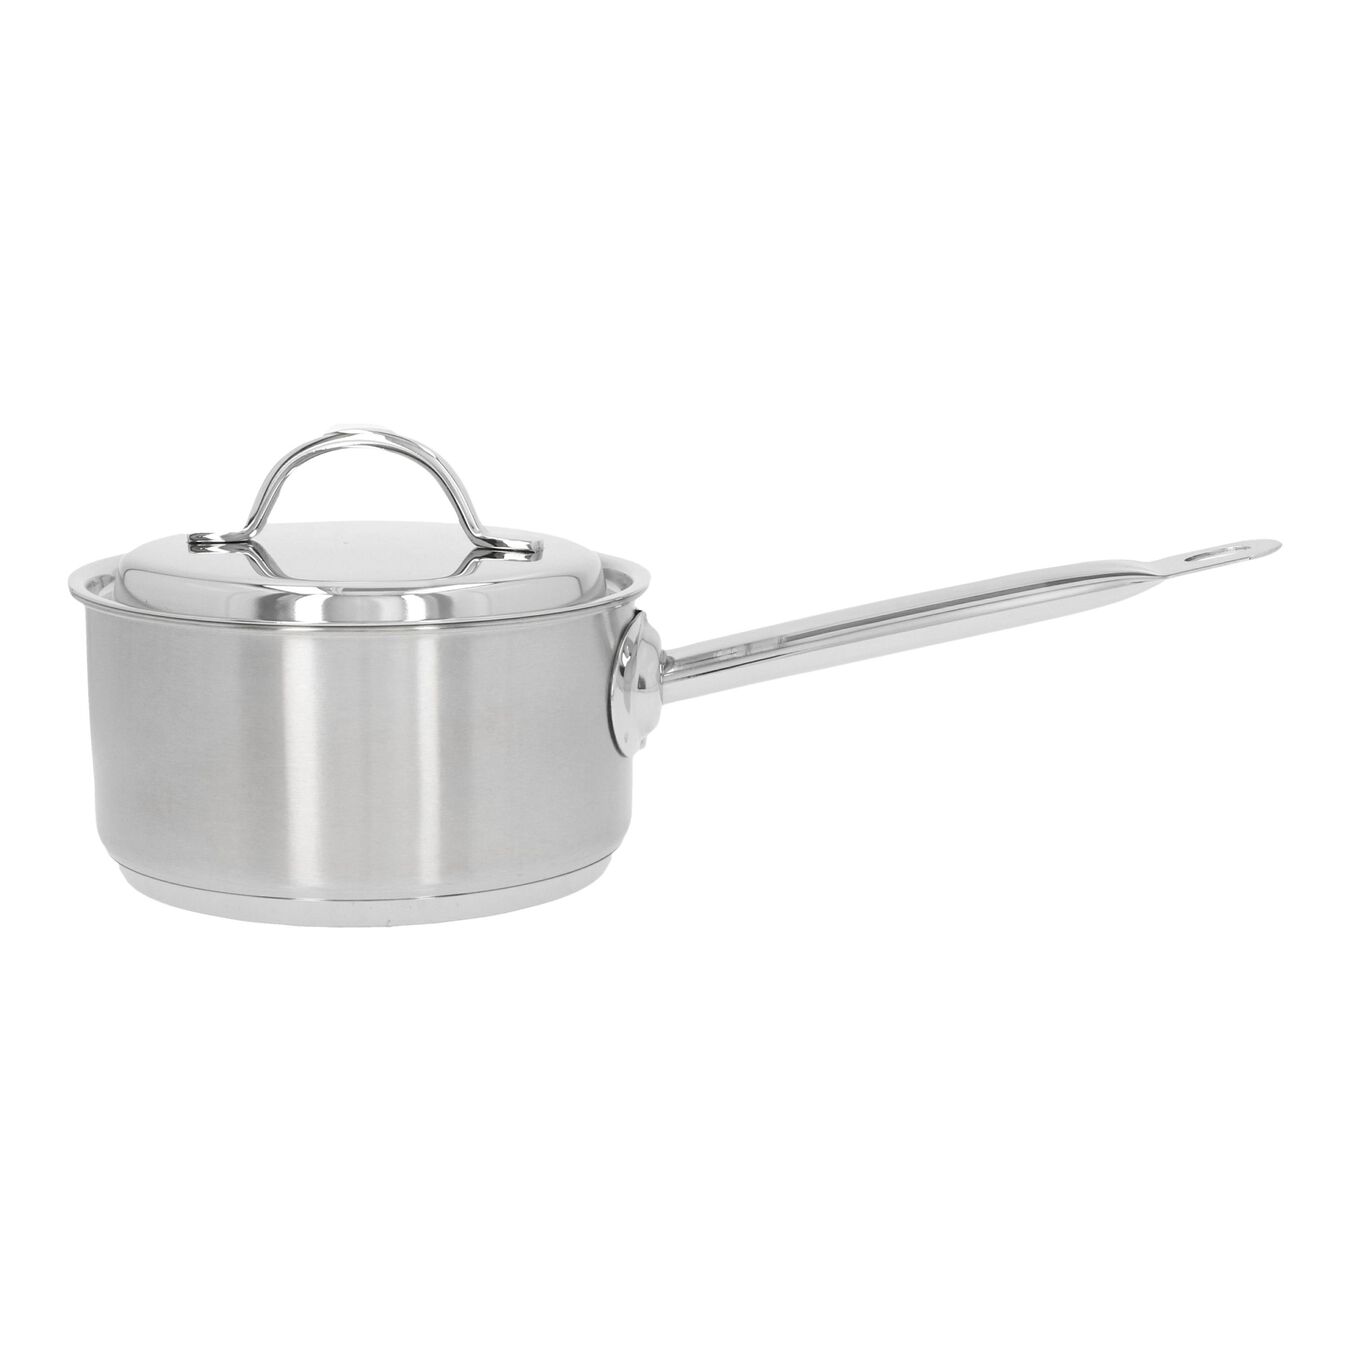 16 cm 18/10 Stainless Steel Saucepan with lid silver,,large 1